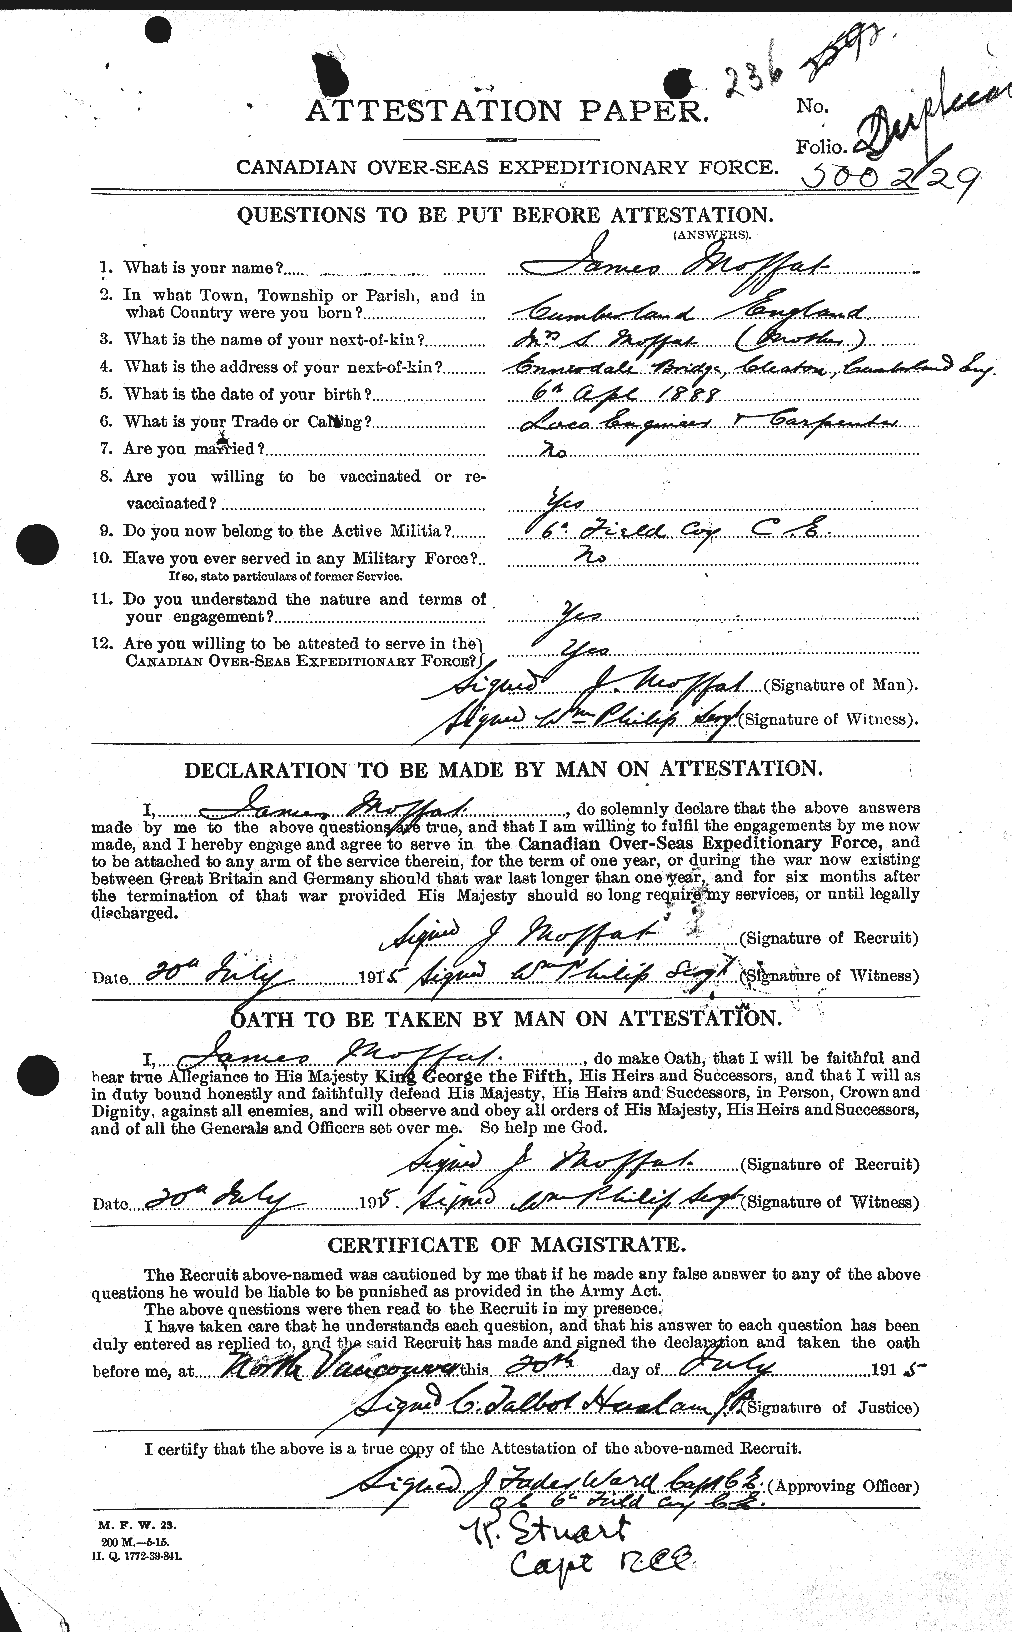 Personnel Records of the First World War - CEF 499027a